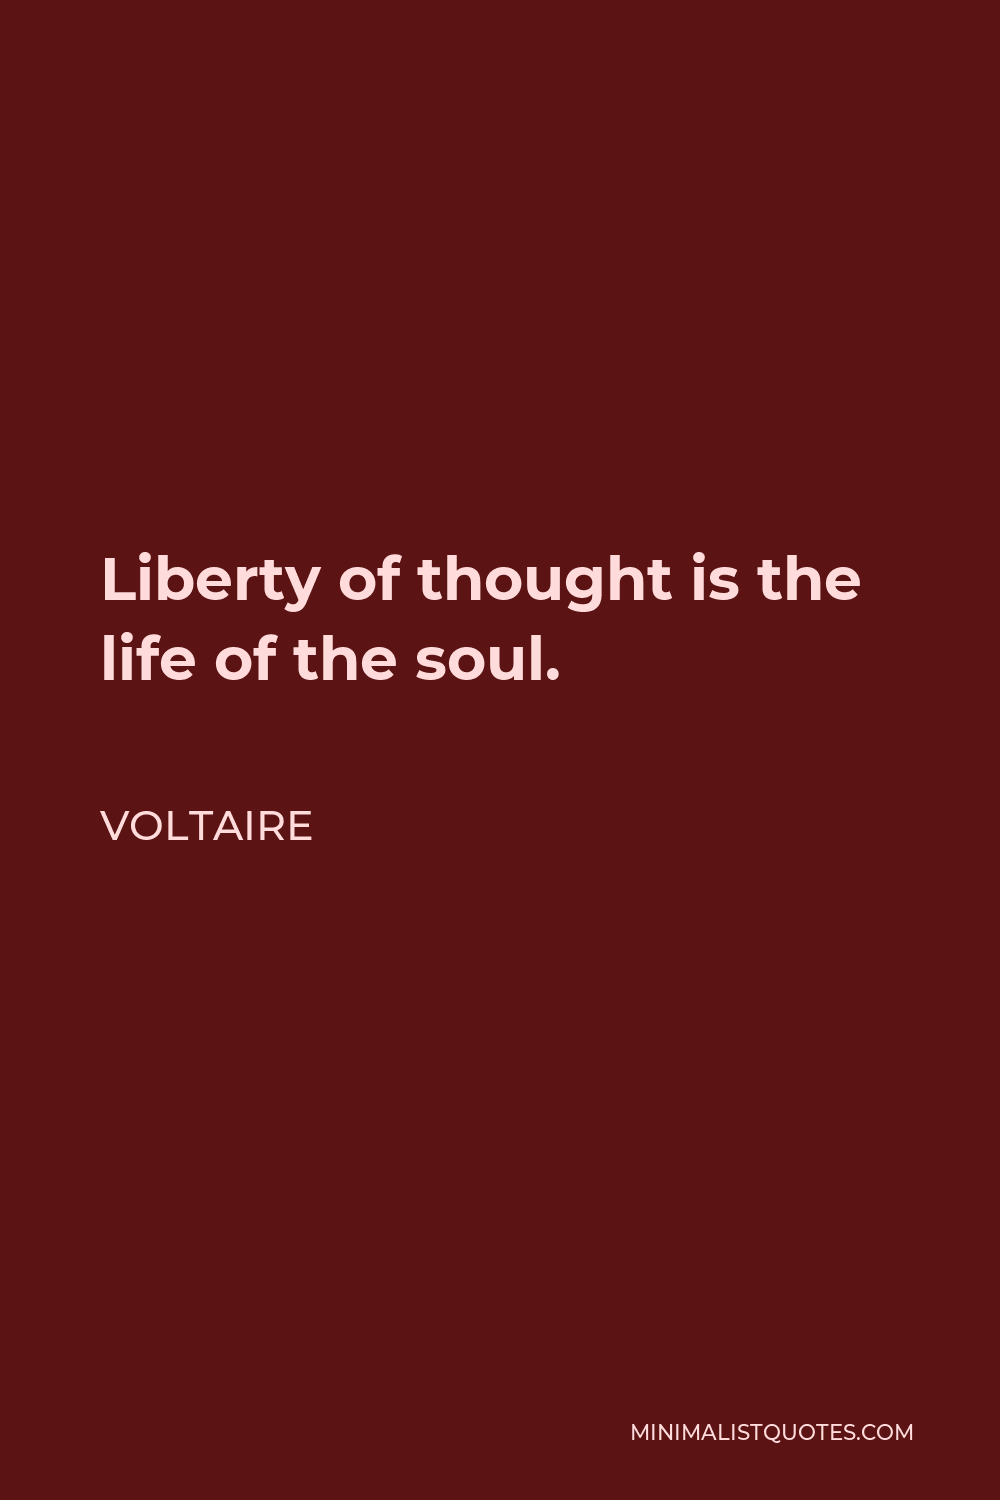 Voltaire Quote - Liberty of thought is the life of the soul.